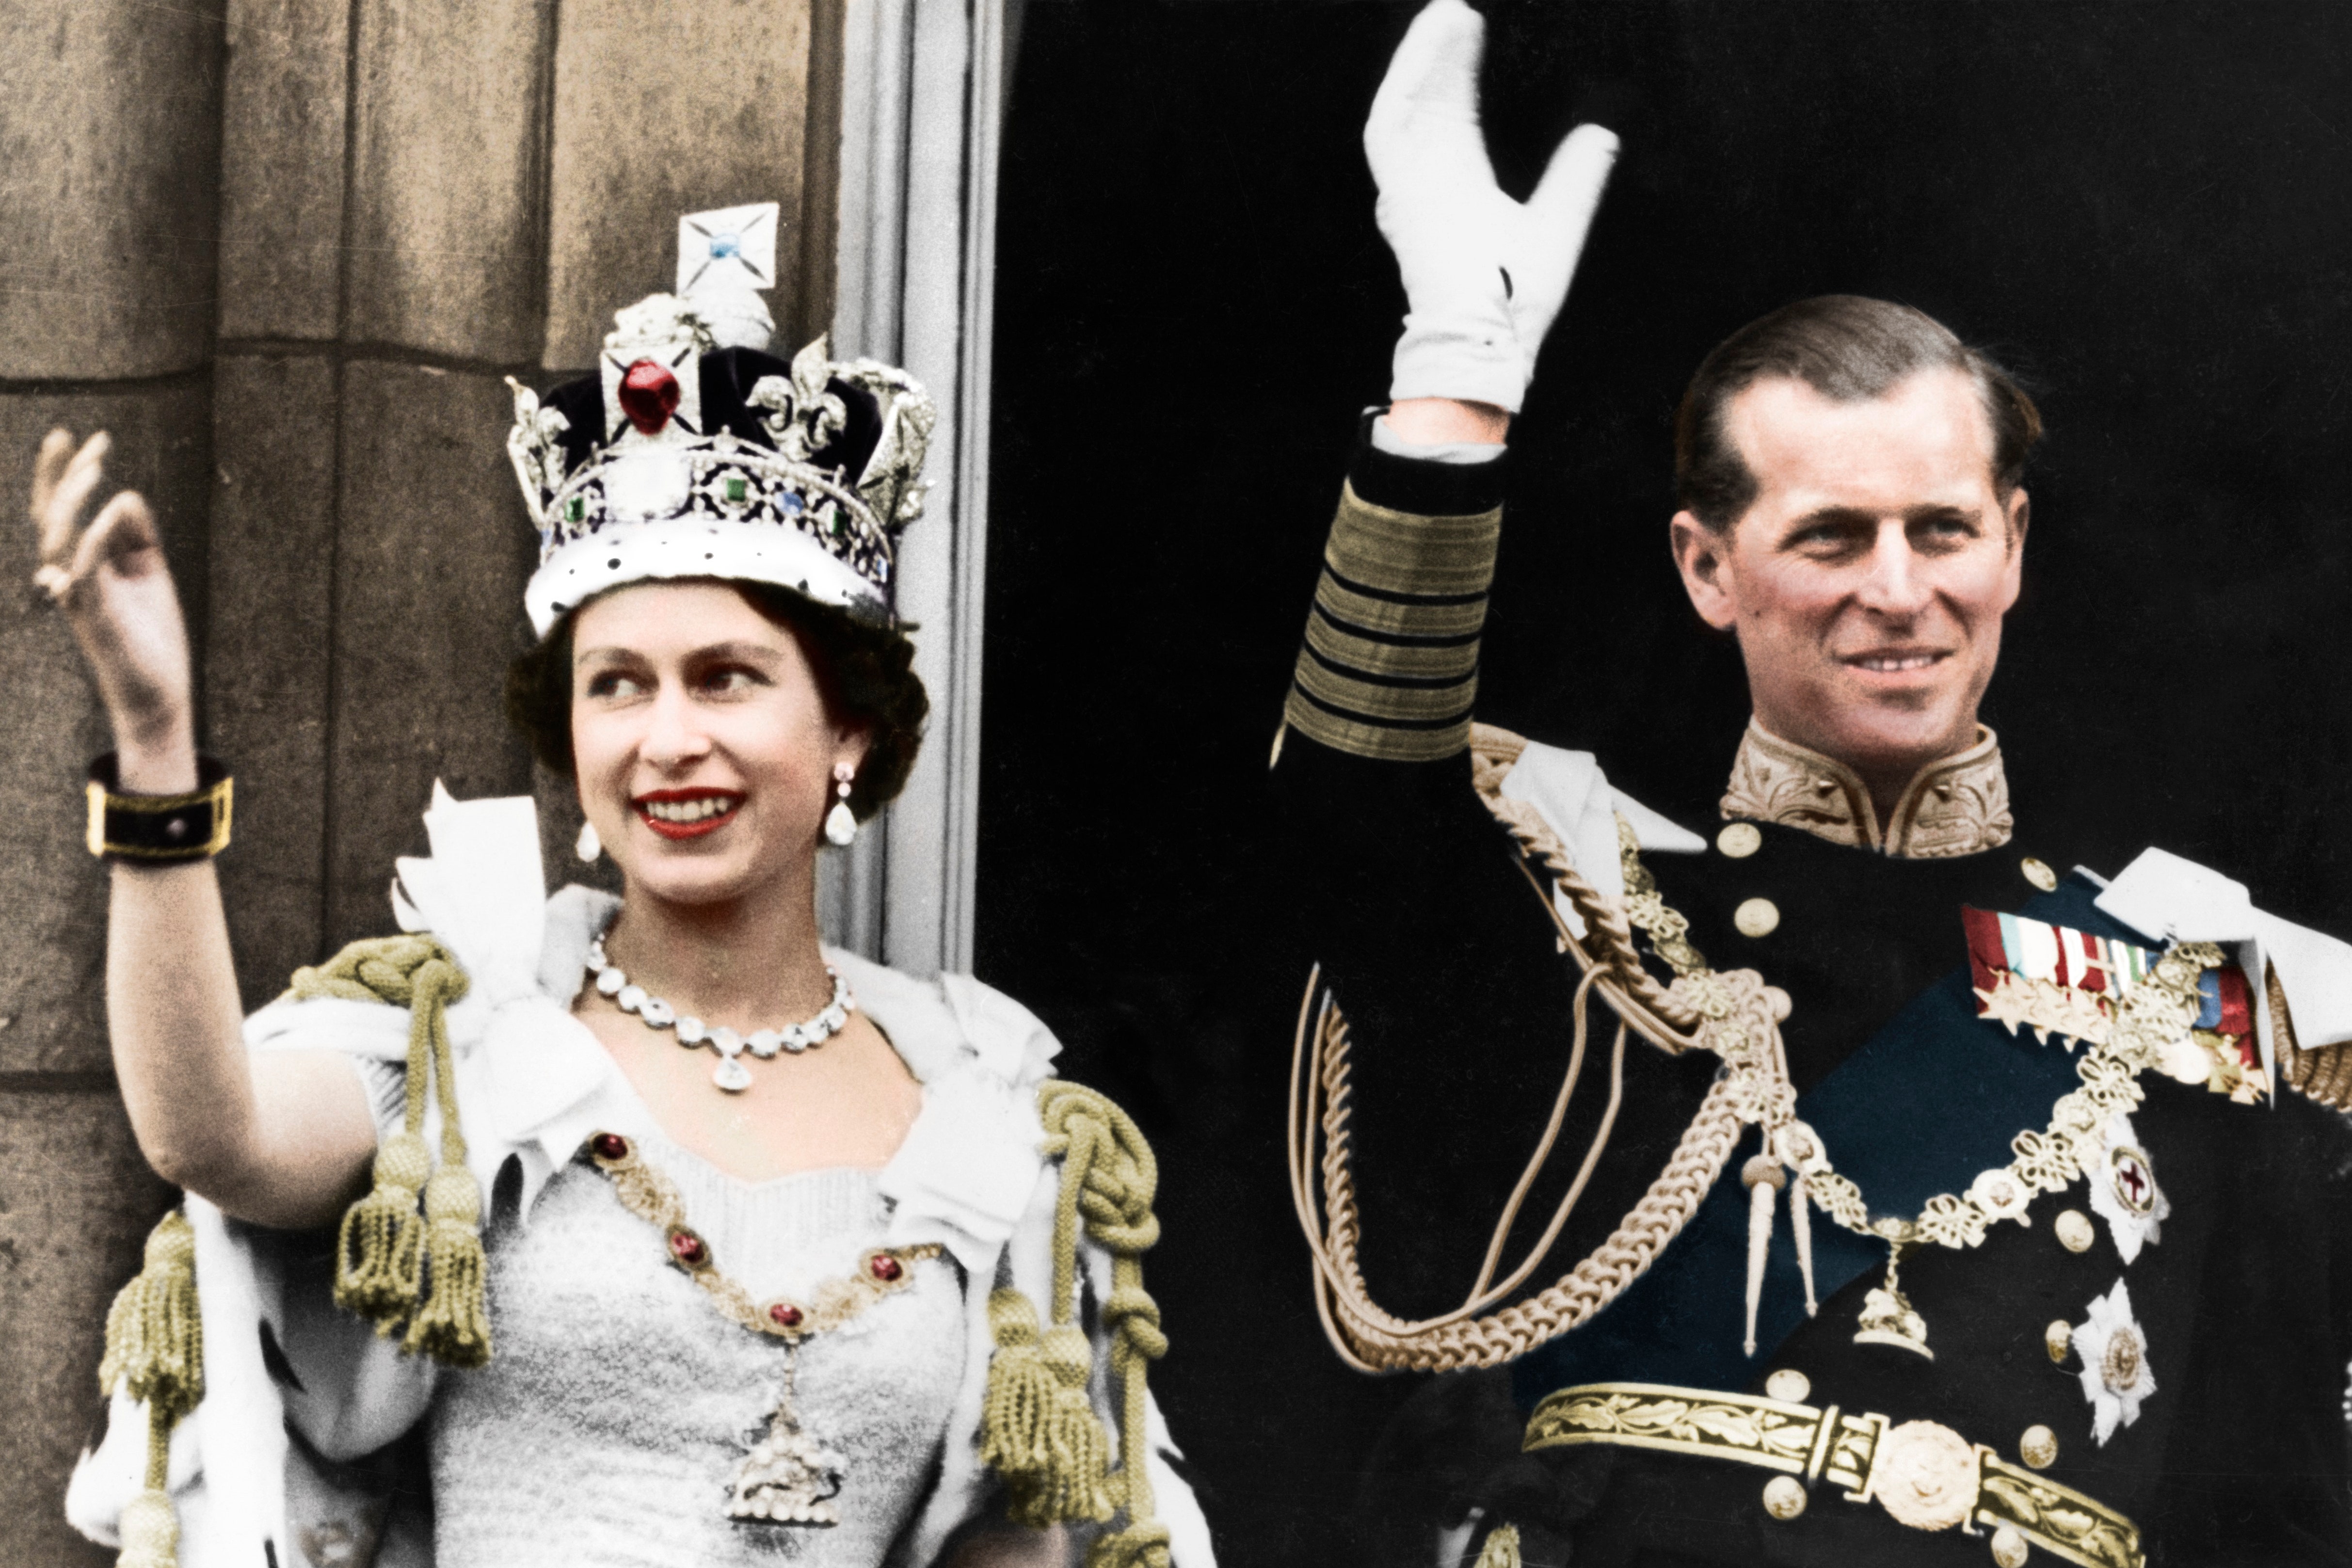 See joyous photographs from the Queen's Coronation in 1953. House & Garden